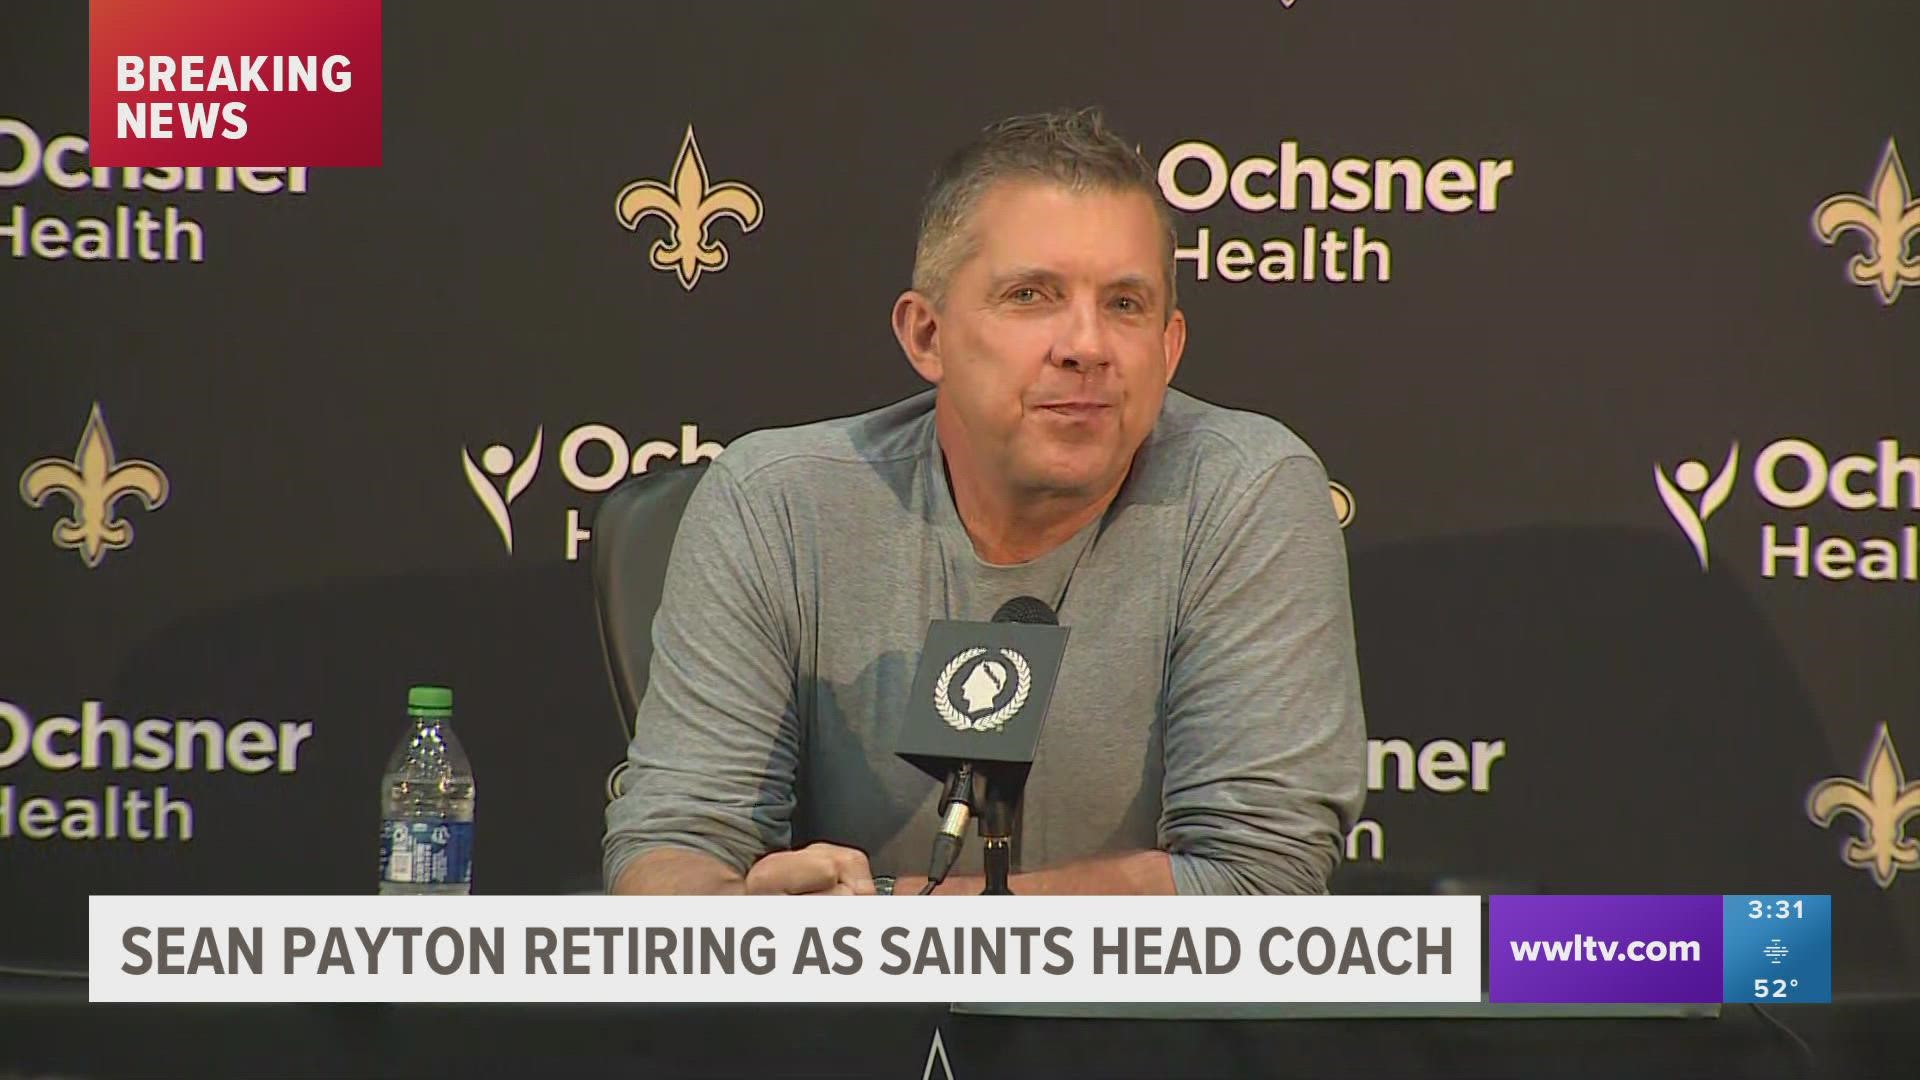 Sean Payton announced that he is stepping away as the Saints head coach at a Tuesday afternoon press conference.